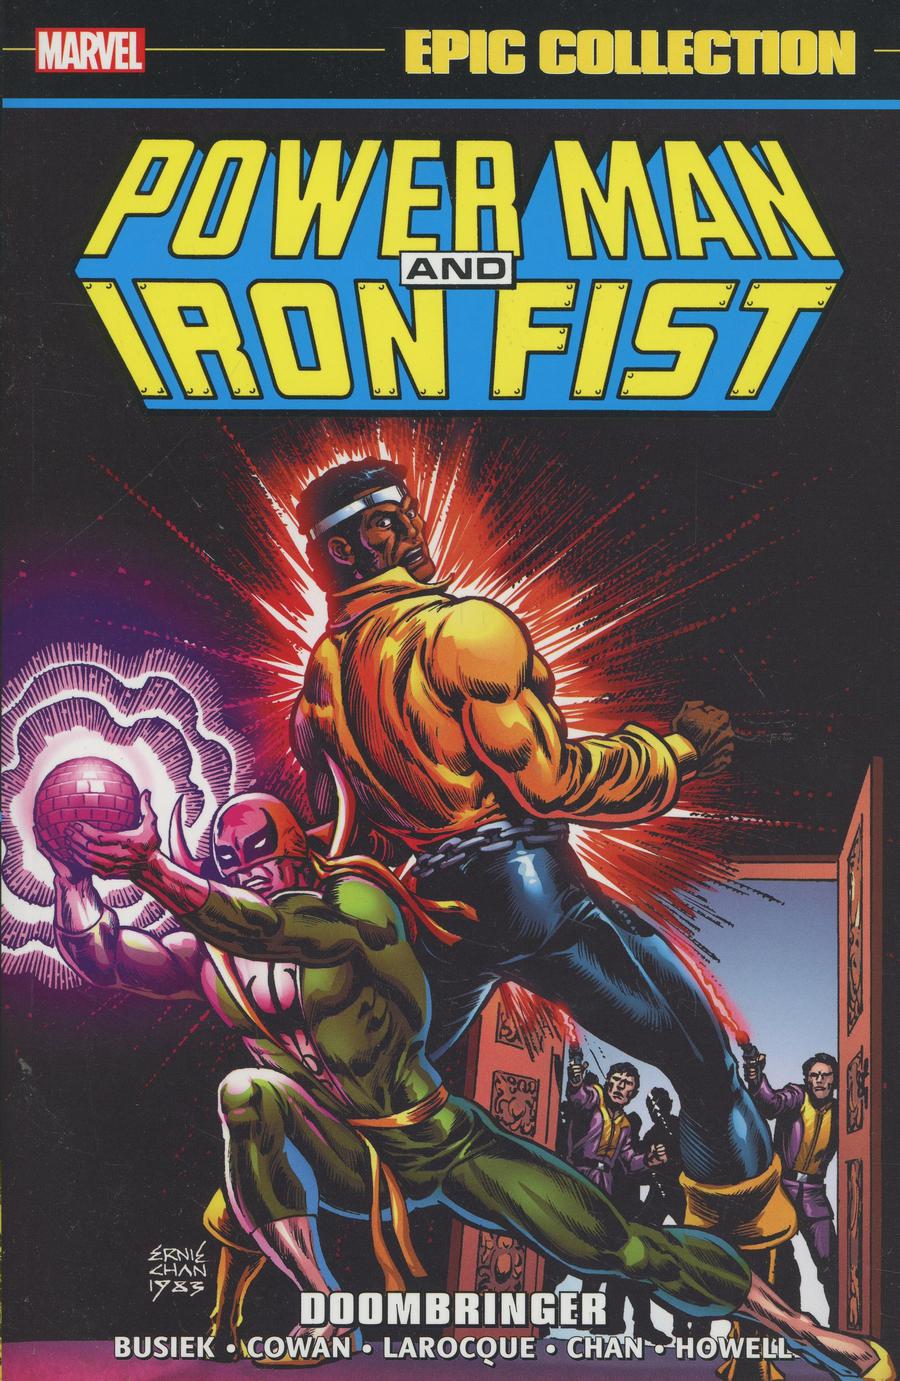 Power Man and Iron Fist (1978) #101, Comic Issues